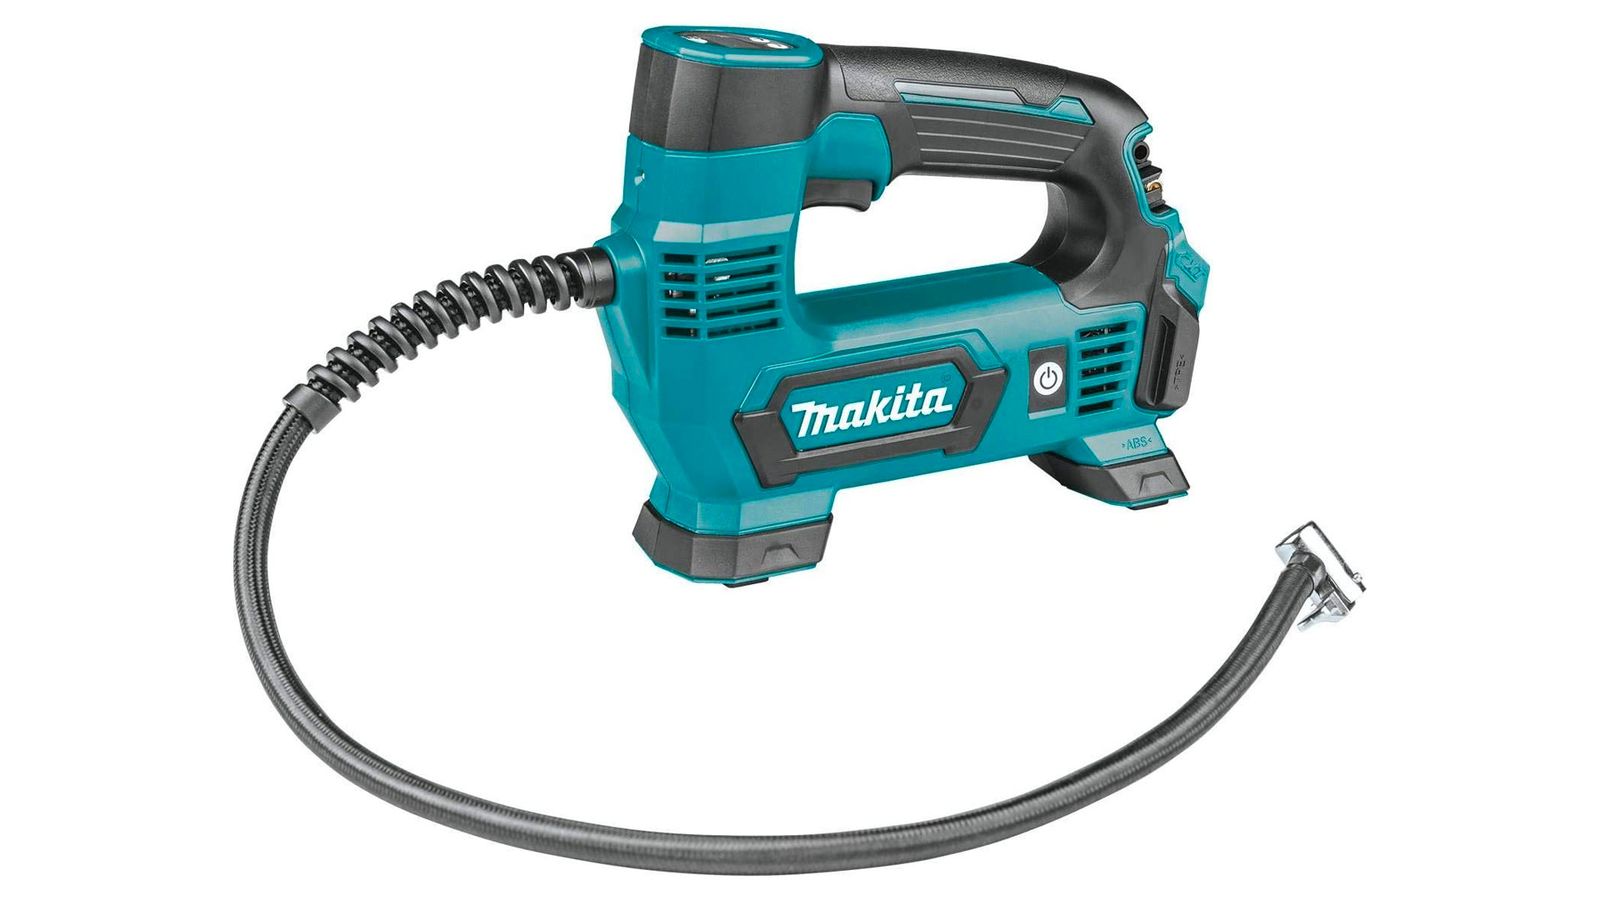 Makita MP100DZ Cordless Inflator product image of a blue and black machine with a digital pressure gauge.